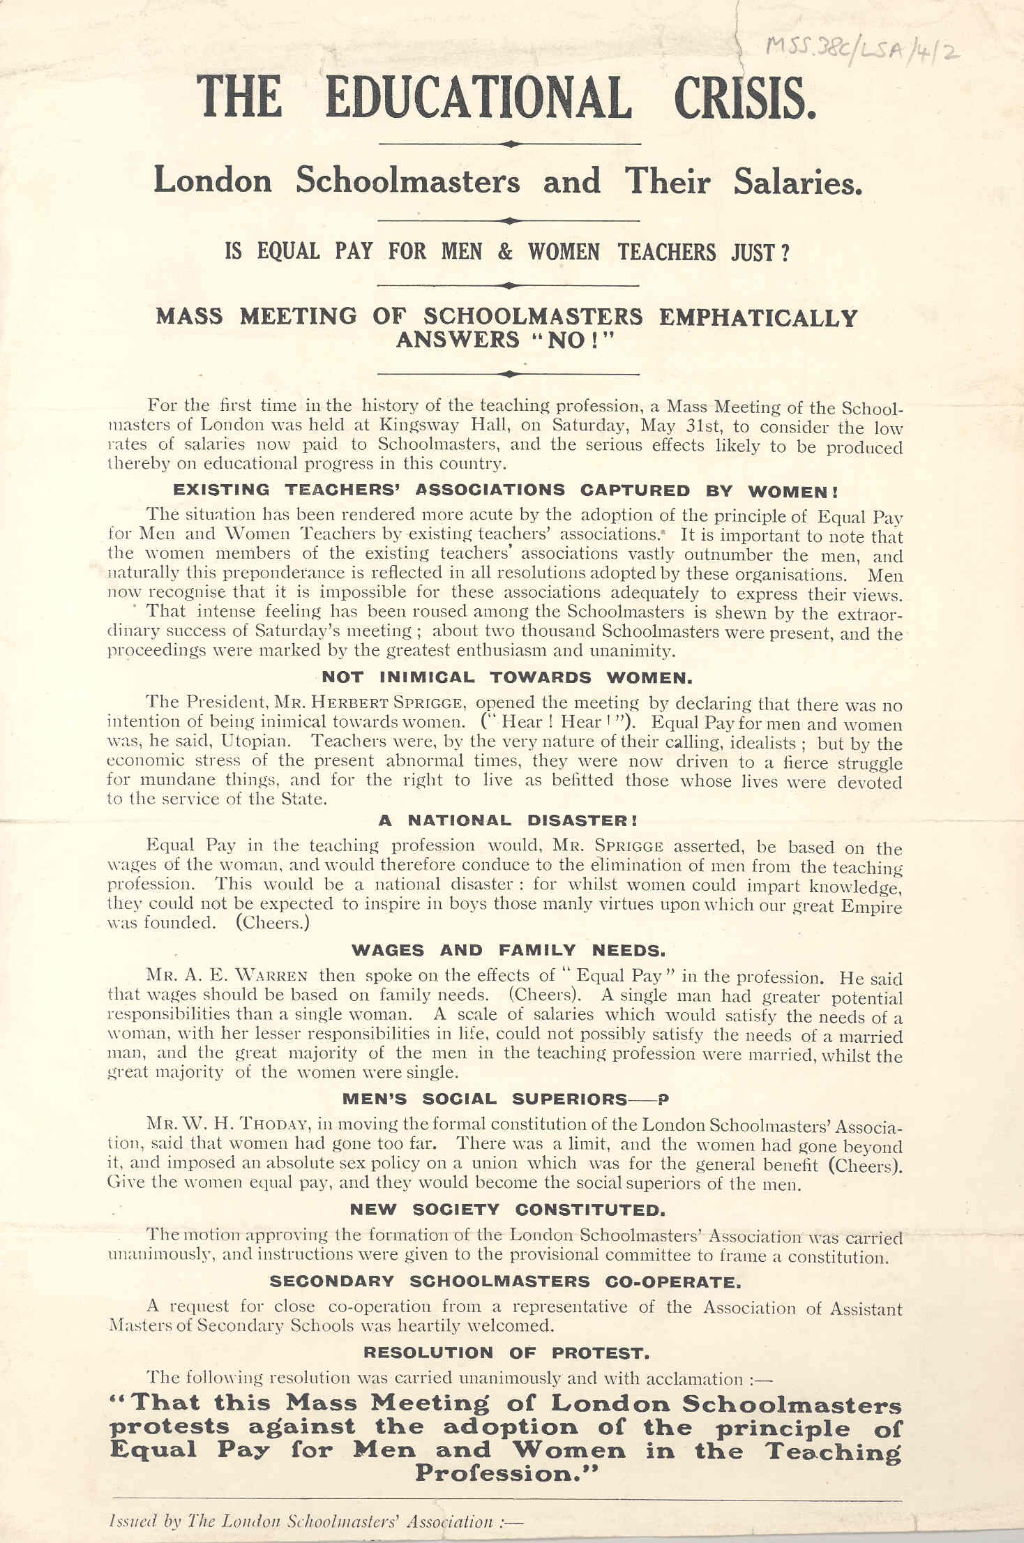 "The Educational Crisis": leaflet about anti-equal pay rally by London Schoolmasters